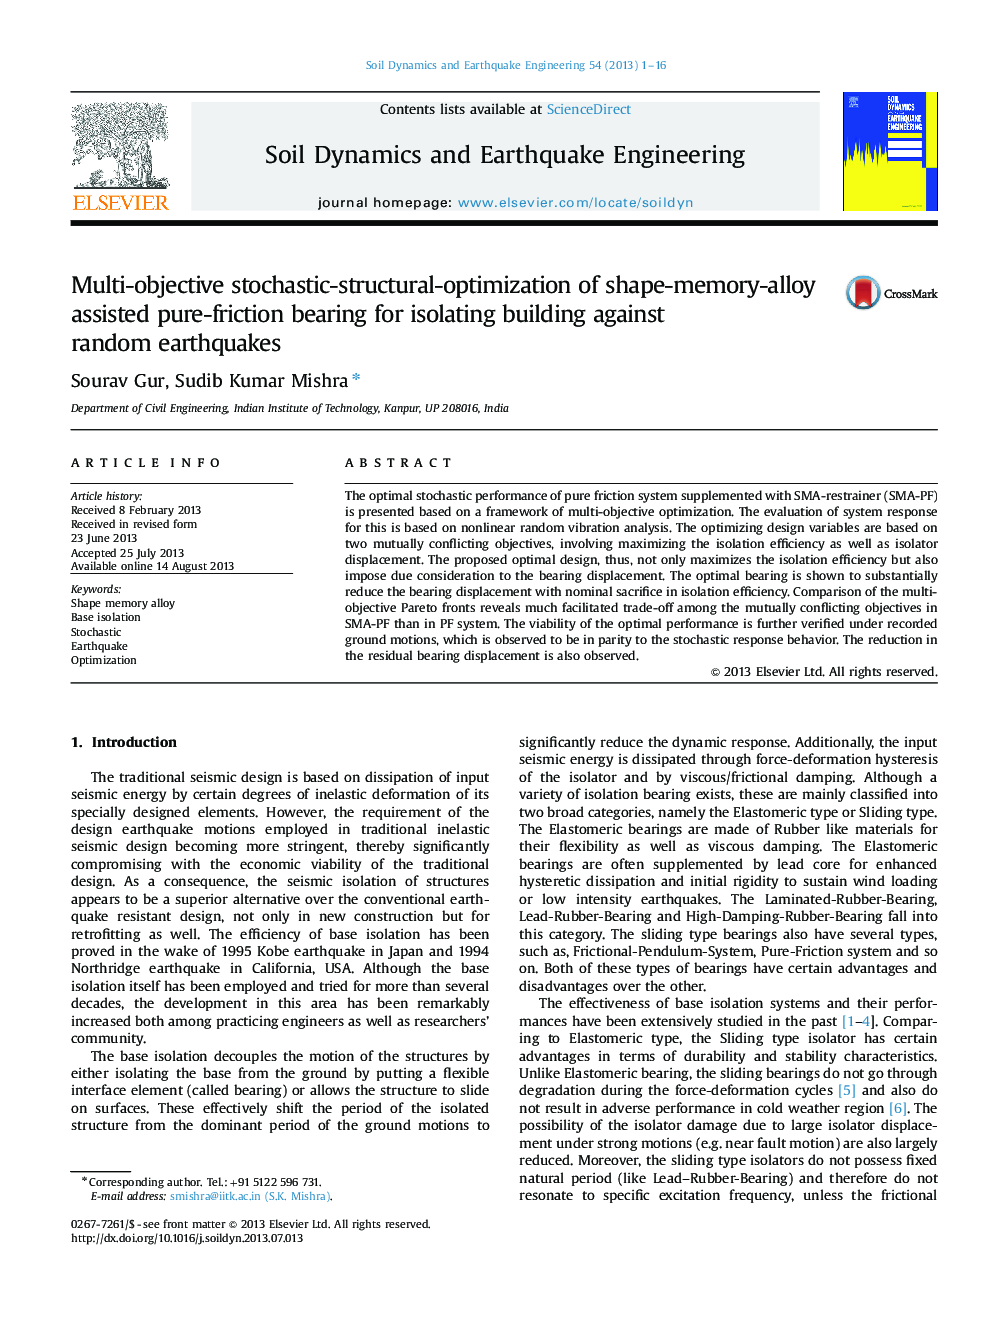 Multi-objective stochastic-structural-optimization of shape-memory-alloy assisted pure-friction bearing for isolating building against random earthquakes